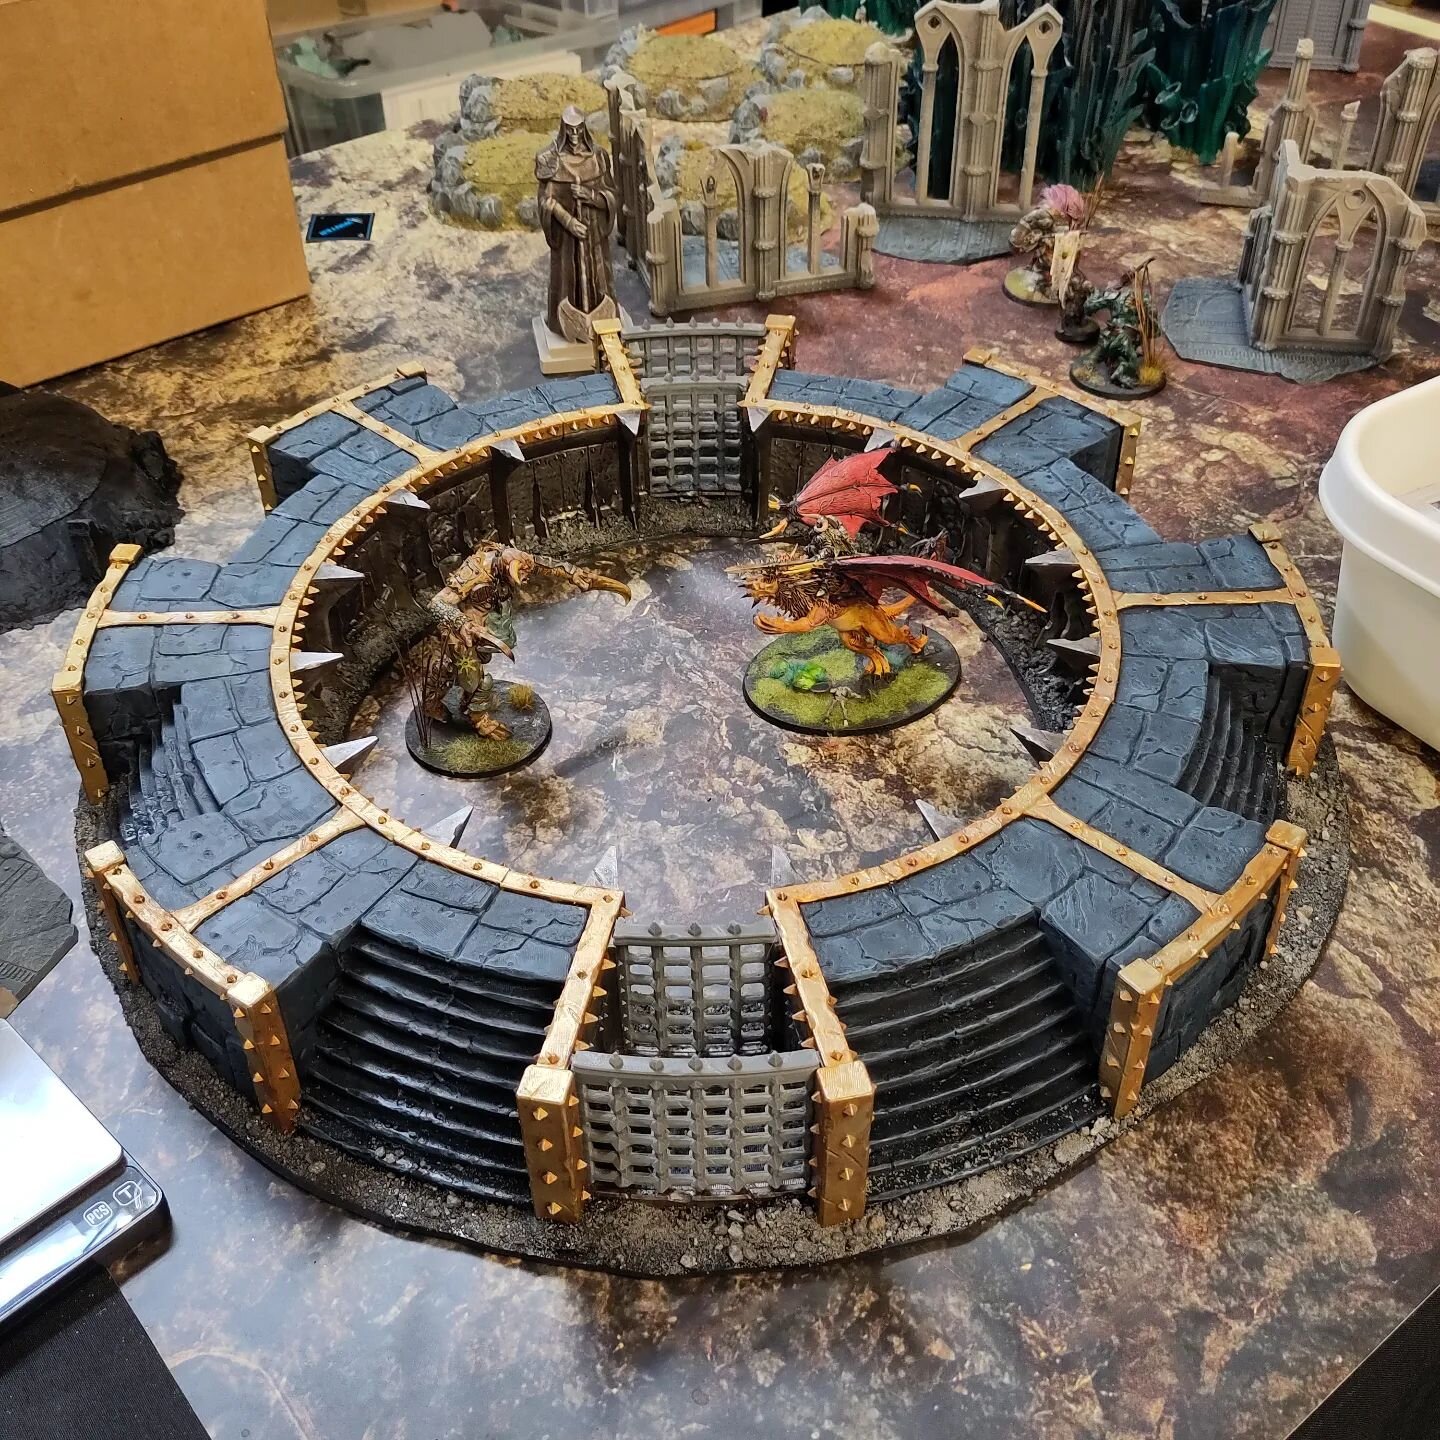 This chaos gladiator pit designed by @darkfantasticmills will be on sale at #salute. It just needs the gates finishing and maybe a few skulls. #skullsfortheskullthrone  #chaos